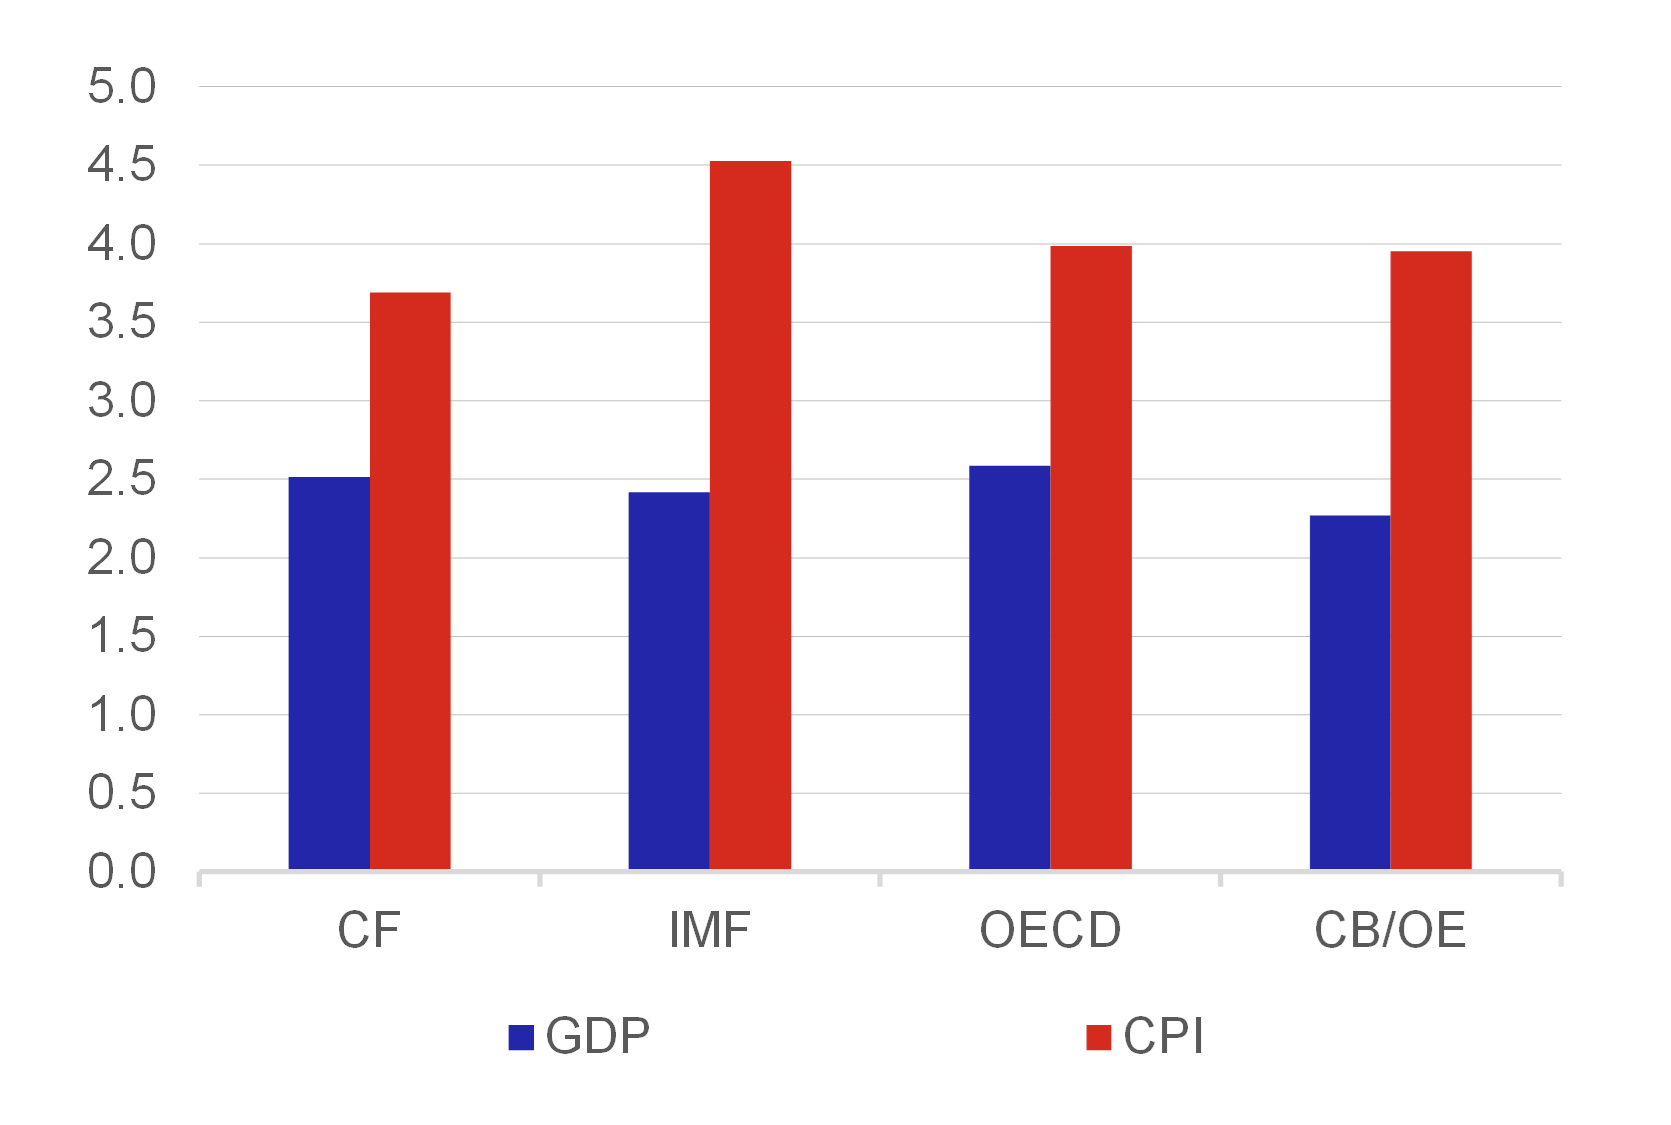 Chart 2 – Comparison of the accuracy of institutions forecasting GDP and inflation for all countries